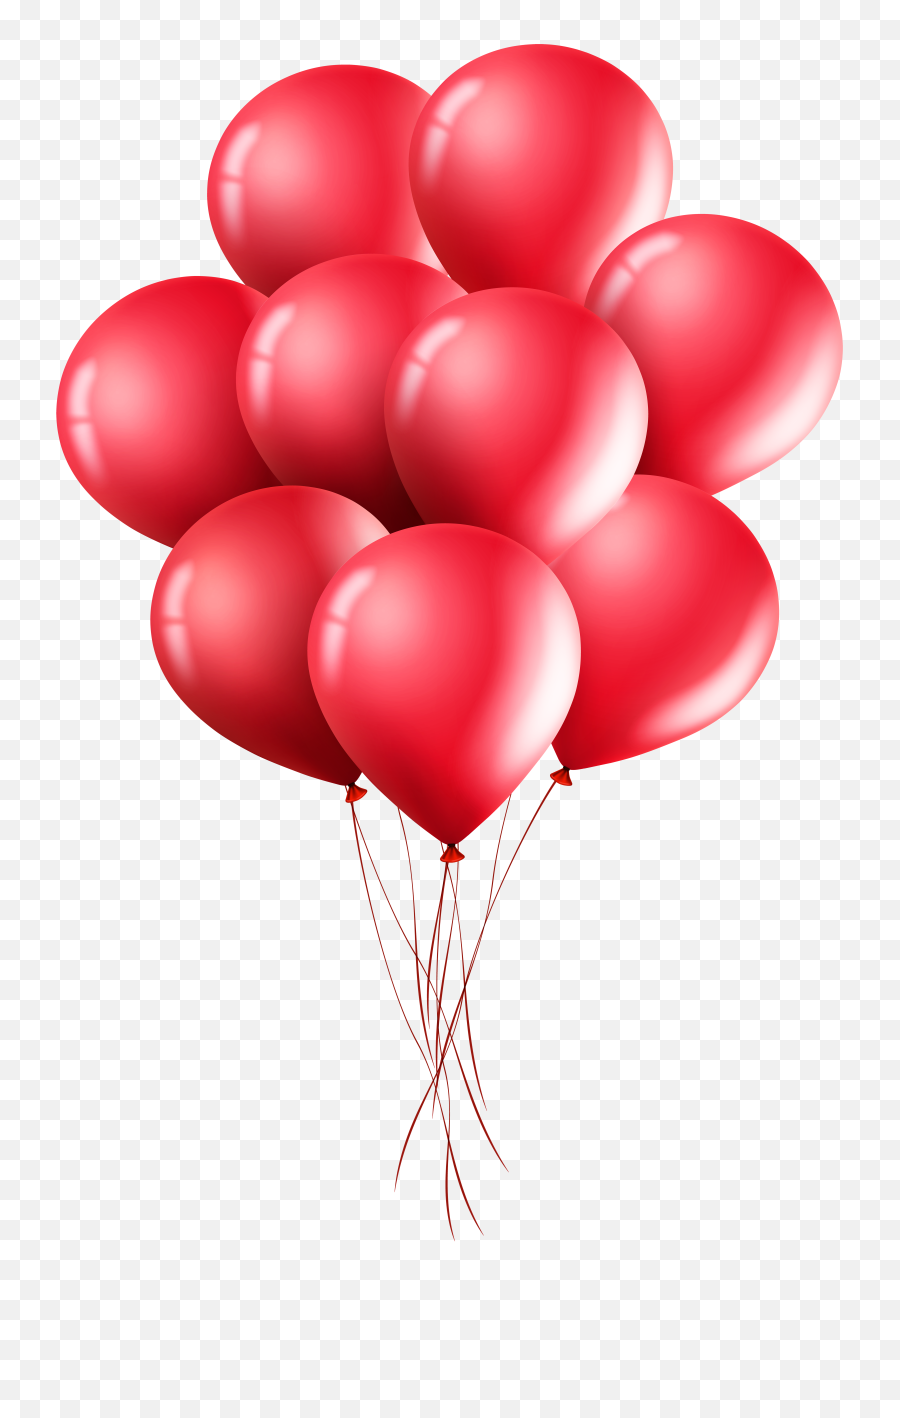 Download Clipart Balloons Red Png With Transparent Background